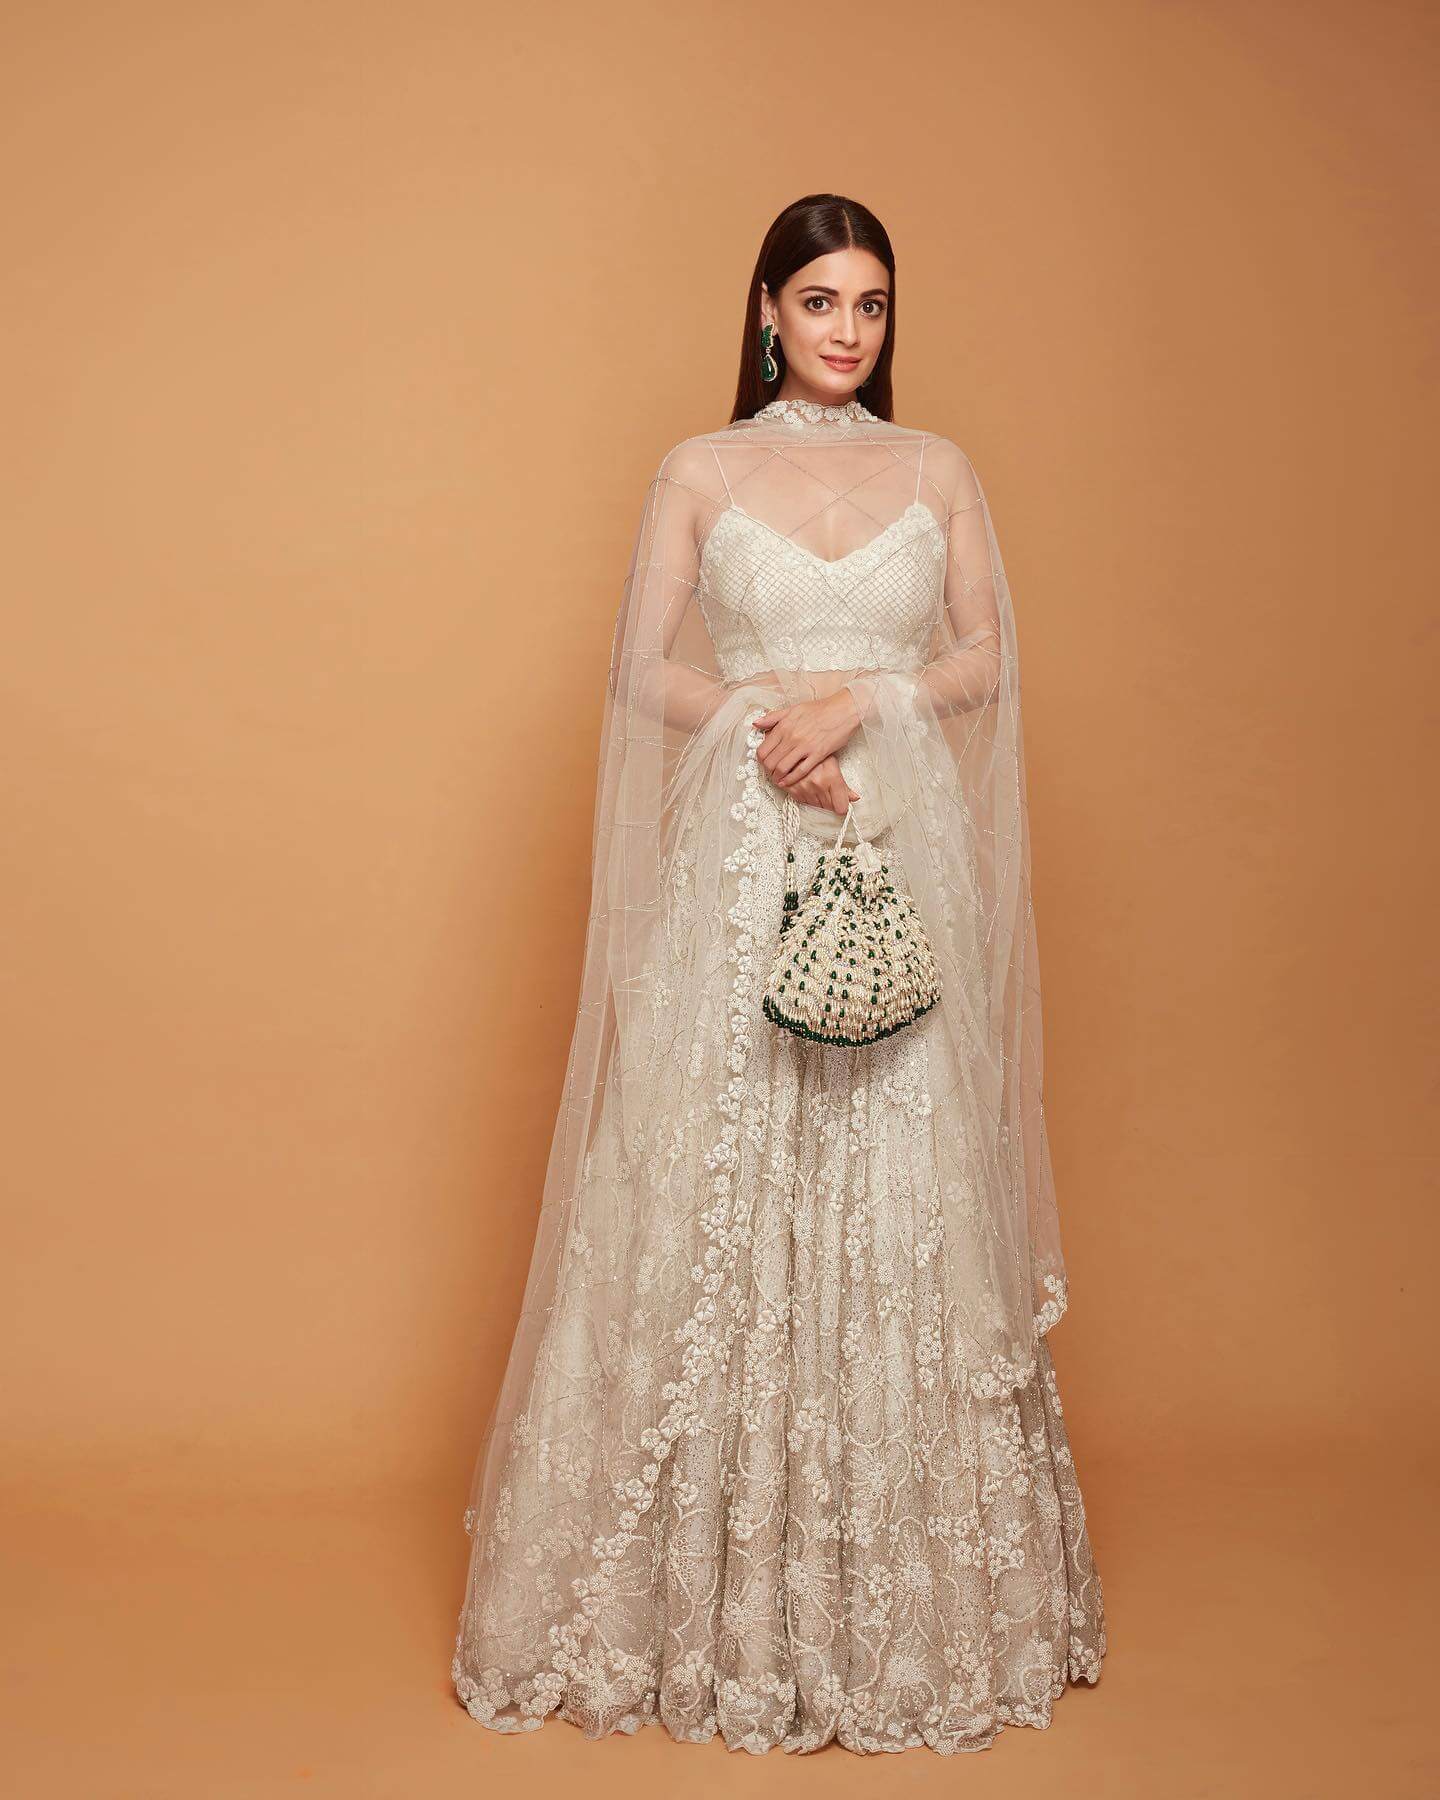 The actress made all heads turn in an Elegant White lehenga set with a statement potli bag and sheer dupatta